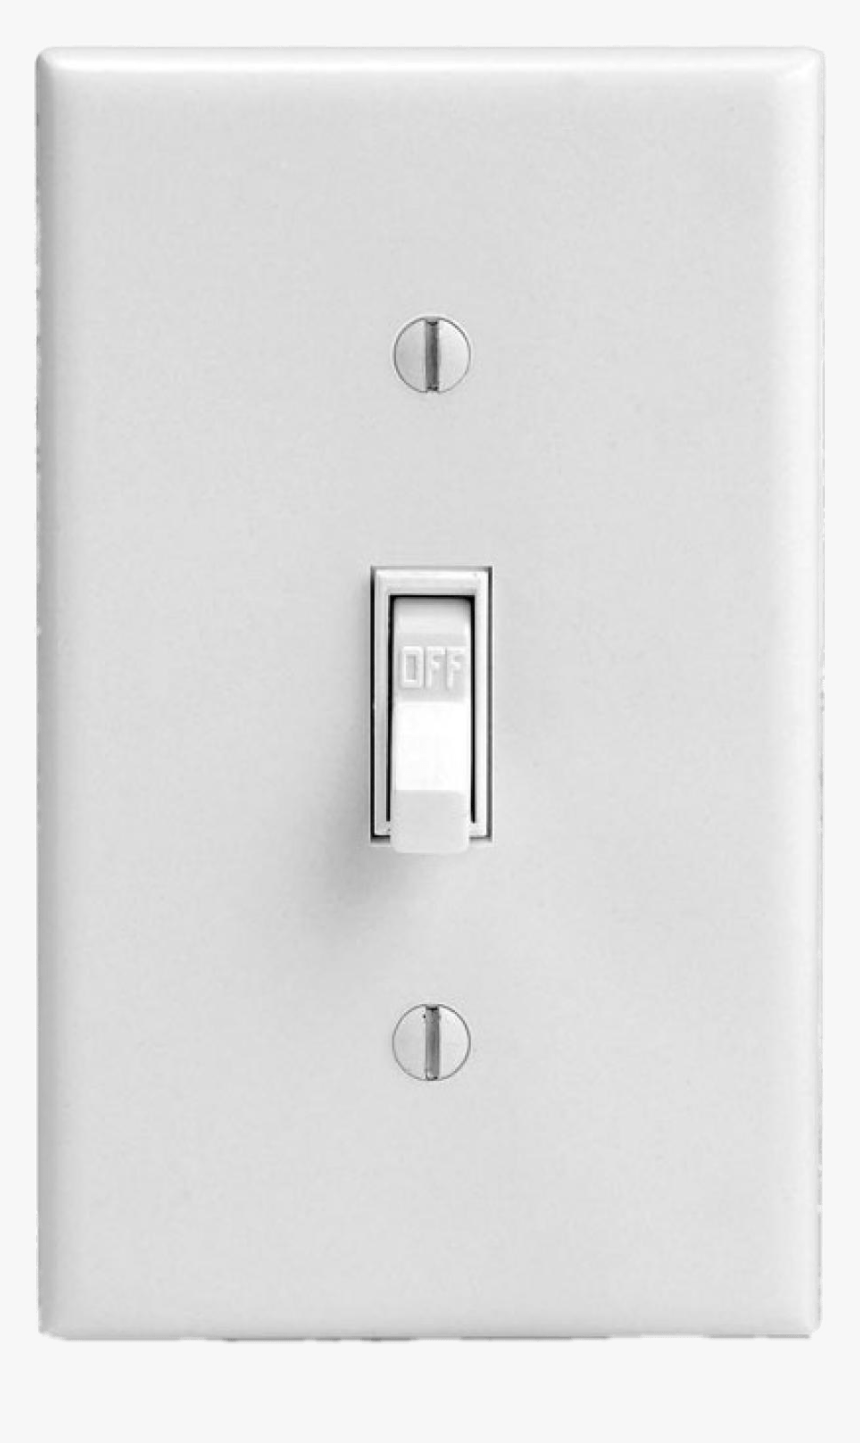 Light Switch Old Fashioned - Light Switch, HD Png Download, Free Download